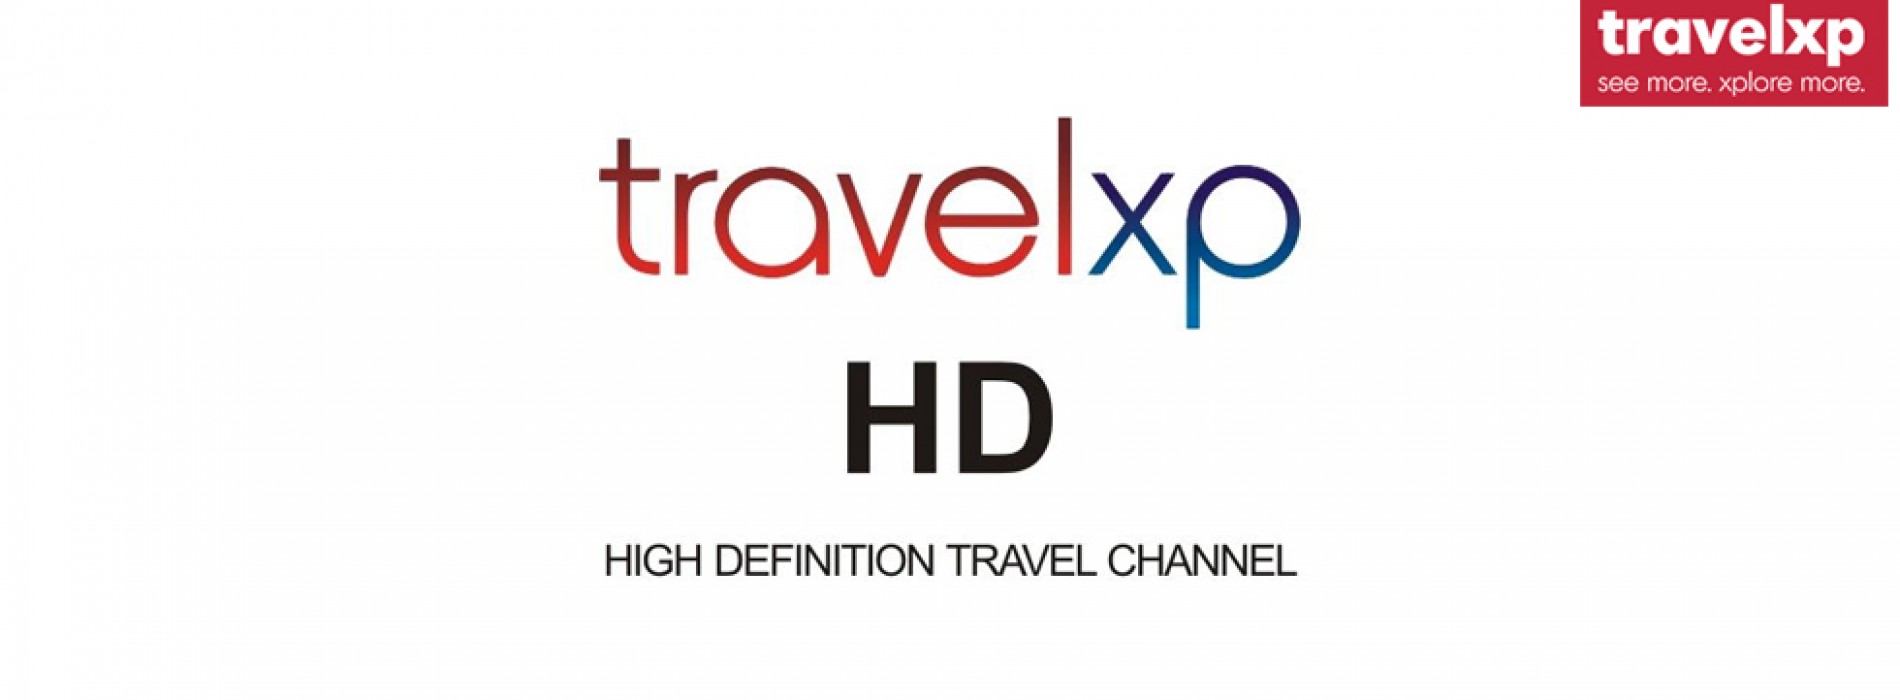 TRAVELXP HD is currently shooting in Canary Islands